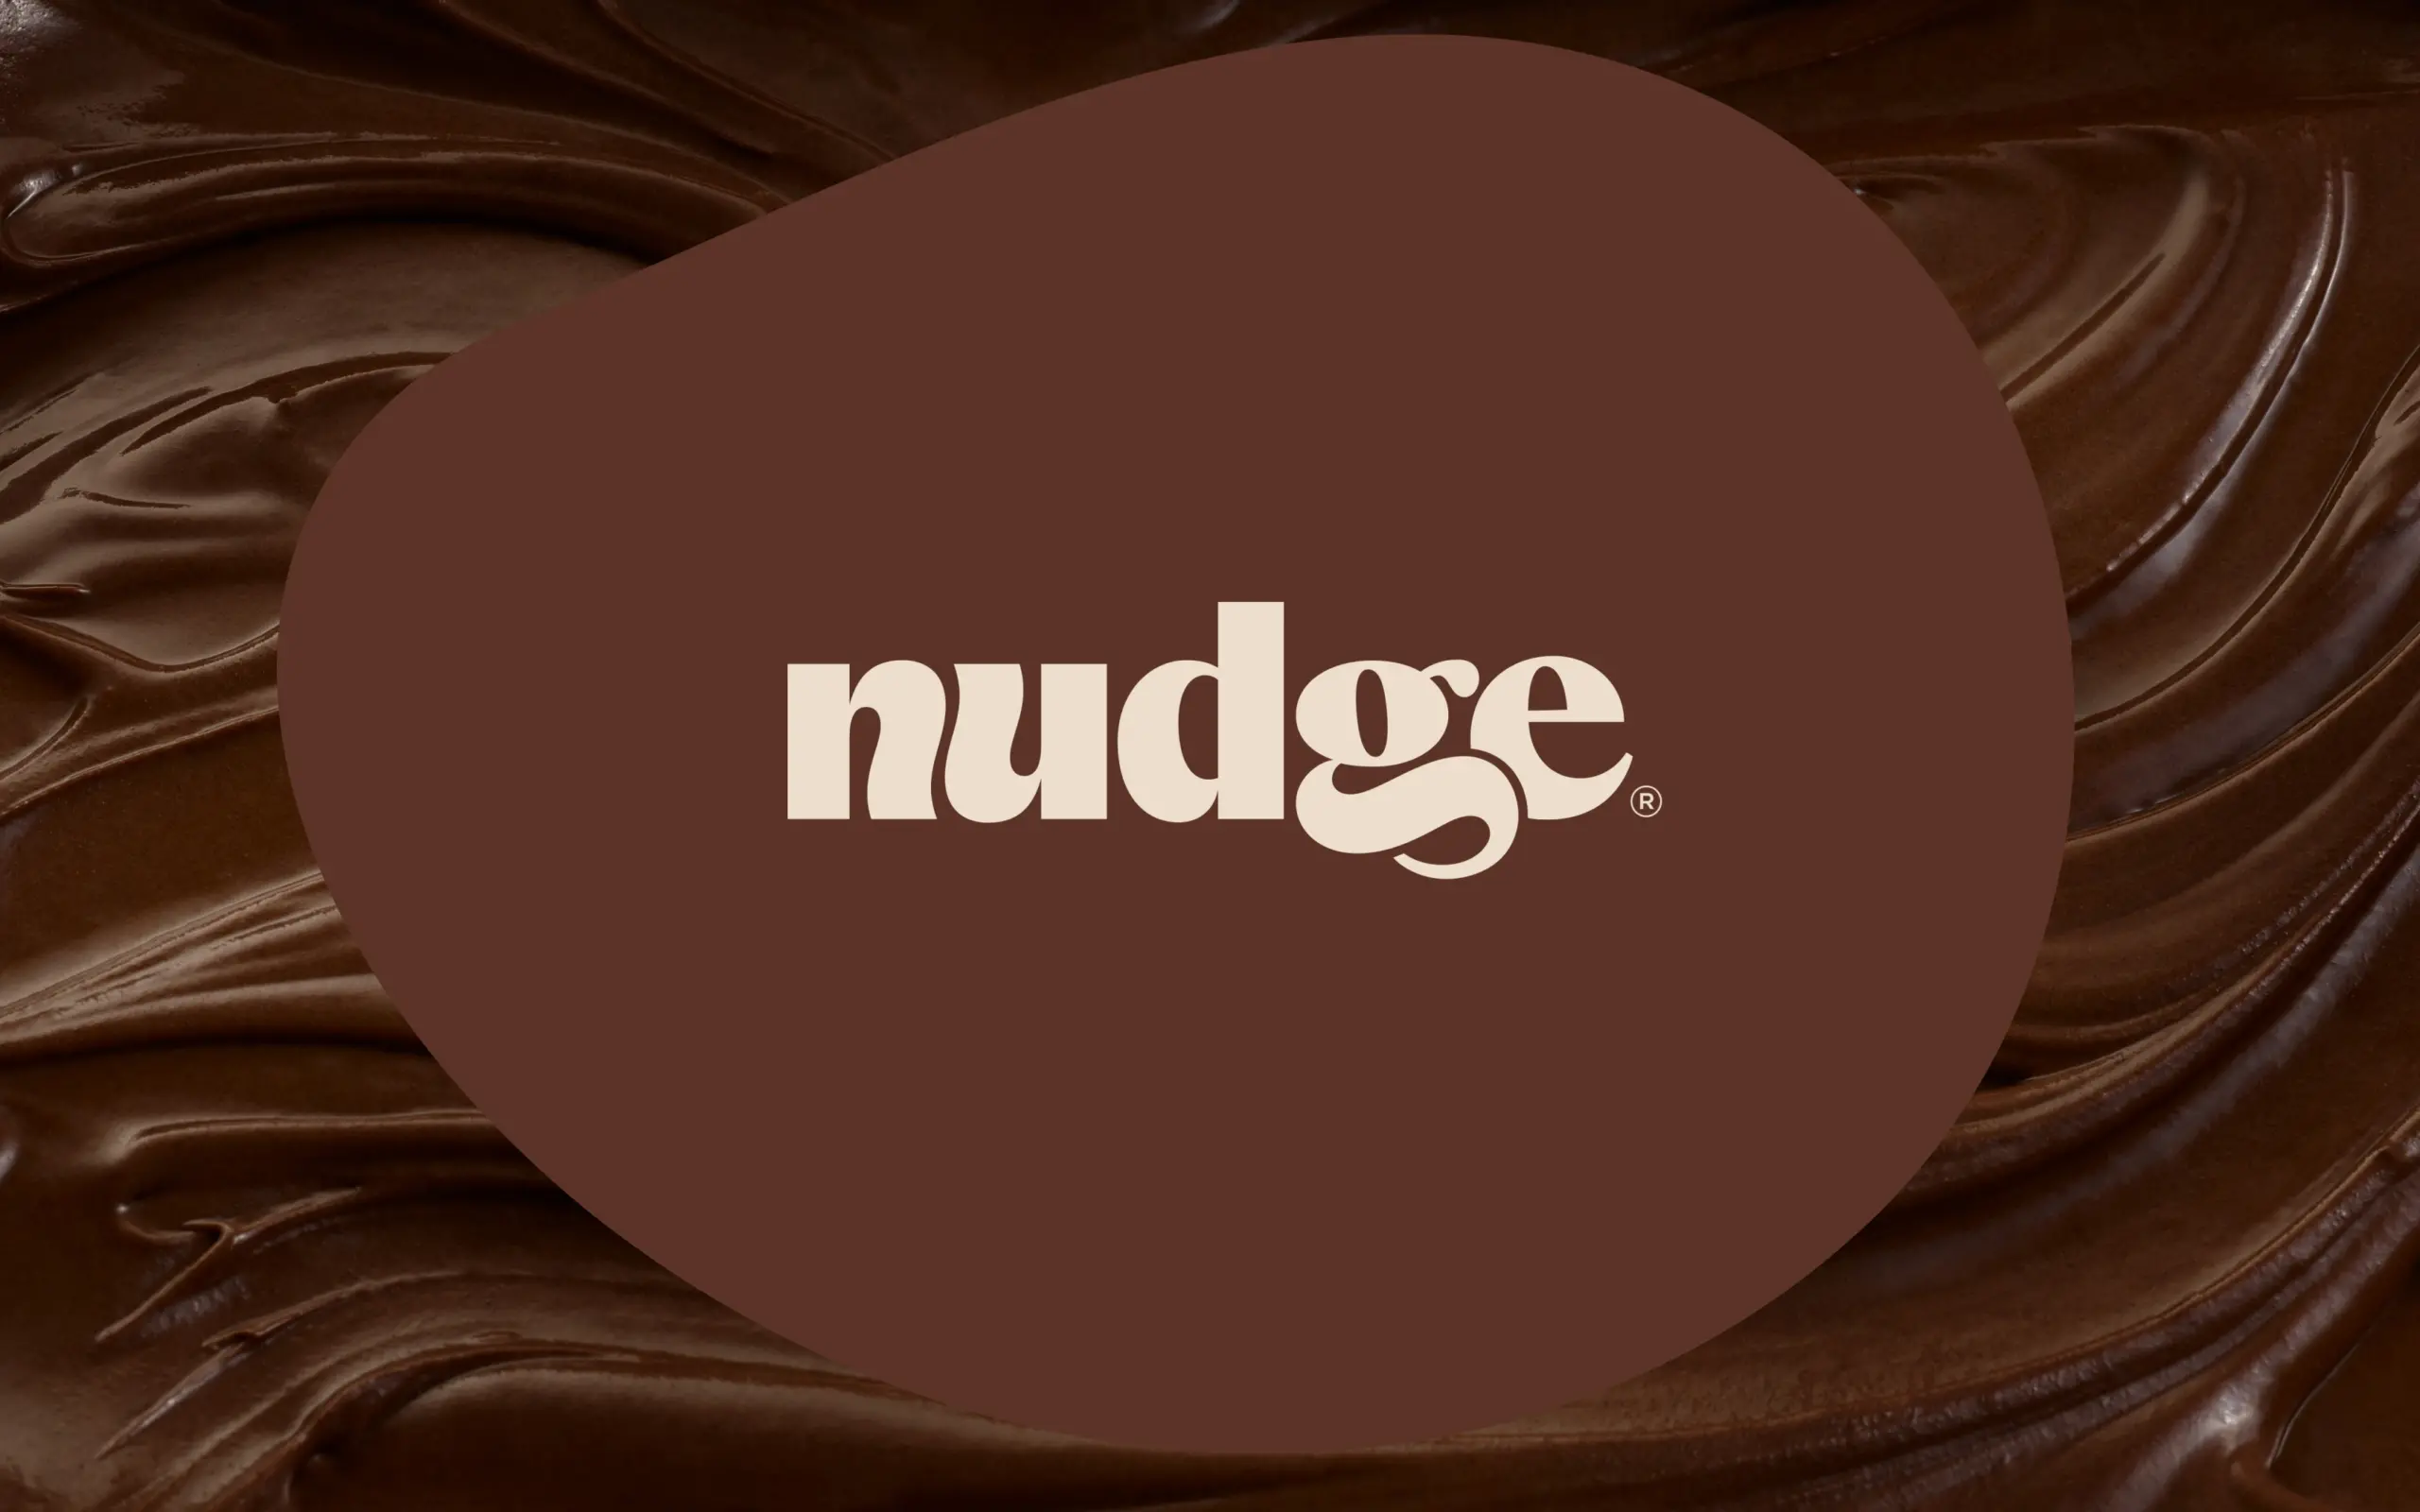 Nudge's logo on a textured, abstract background